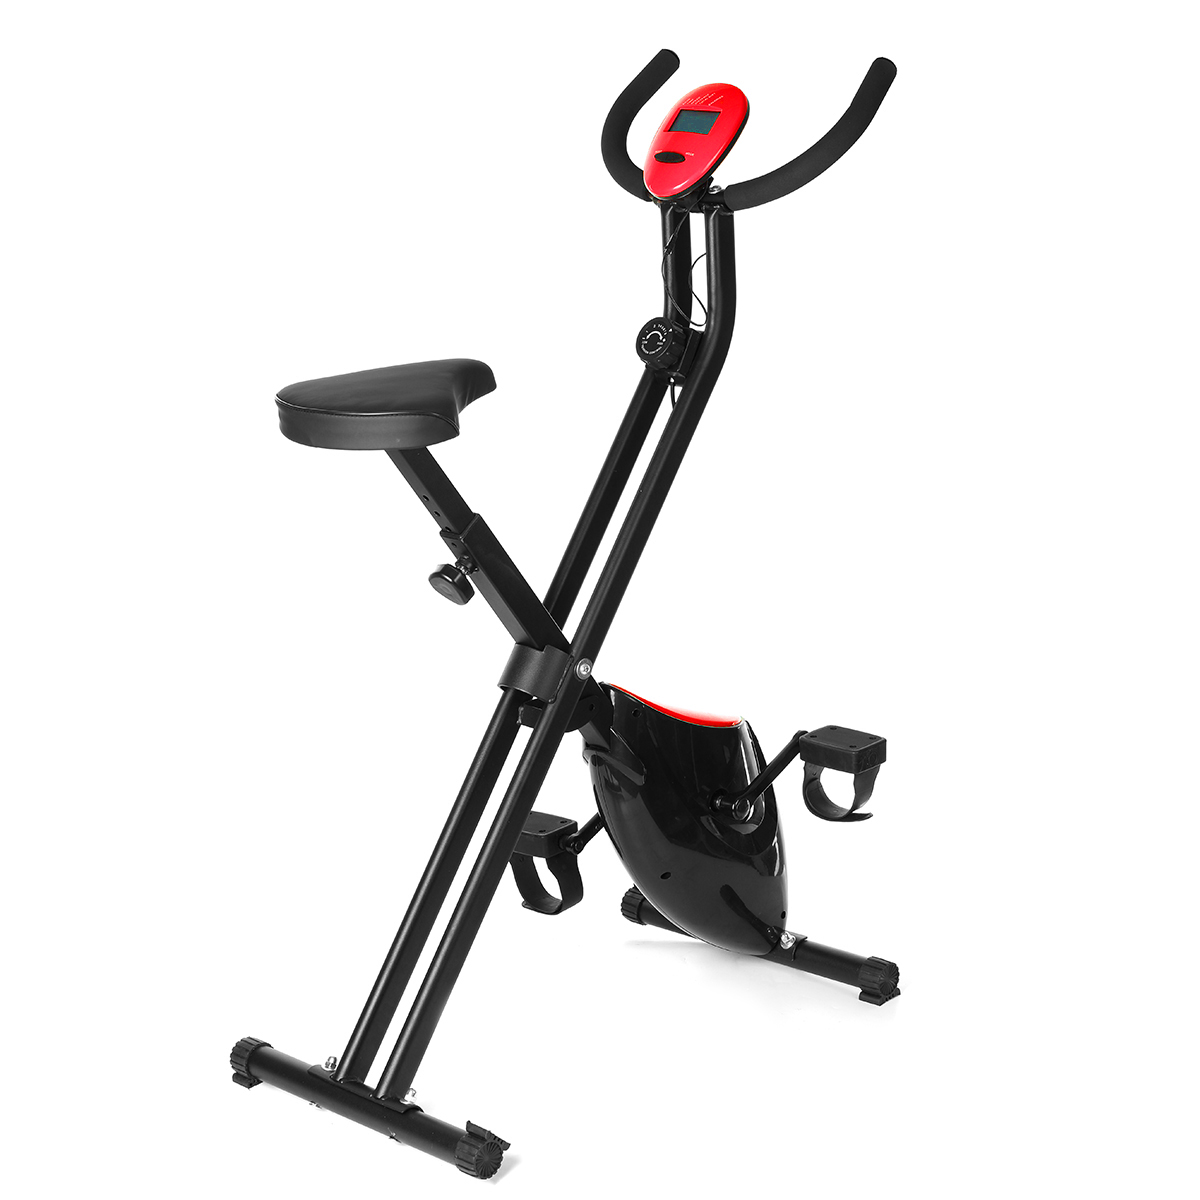 

Folding Home Gym Spinning Bicycle Cardio Sports Fitness Bike Exercise Tools Training Slimming Equipment